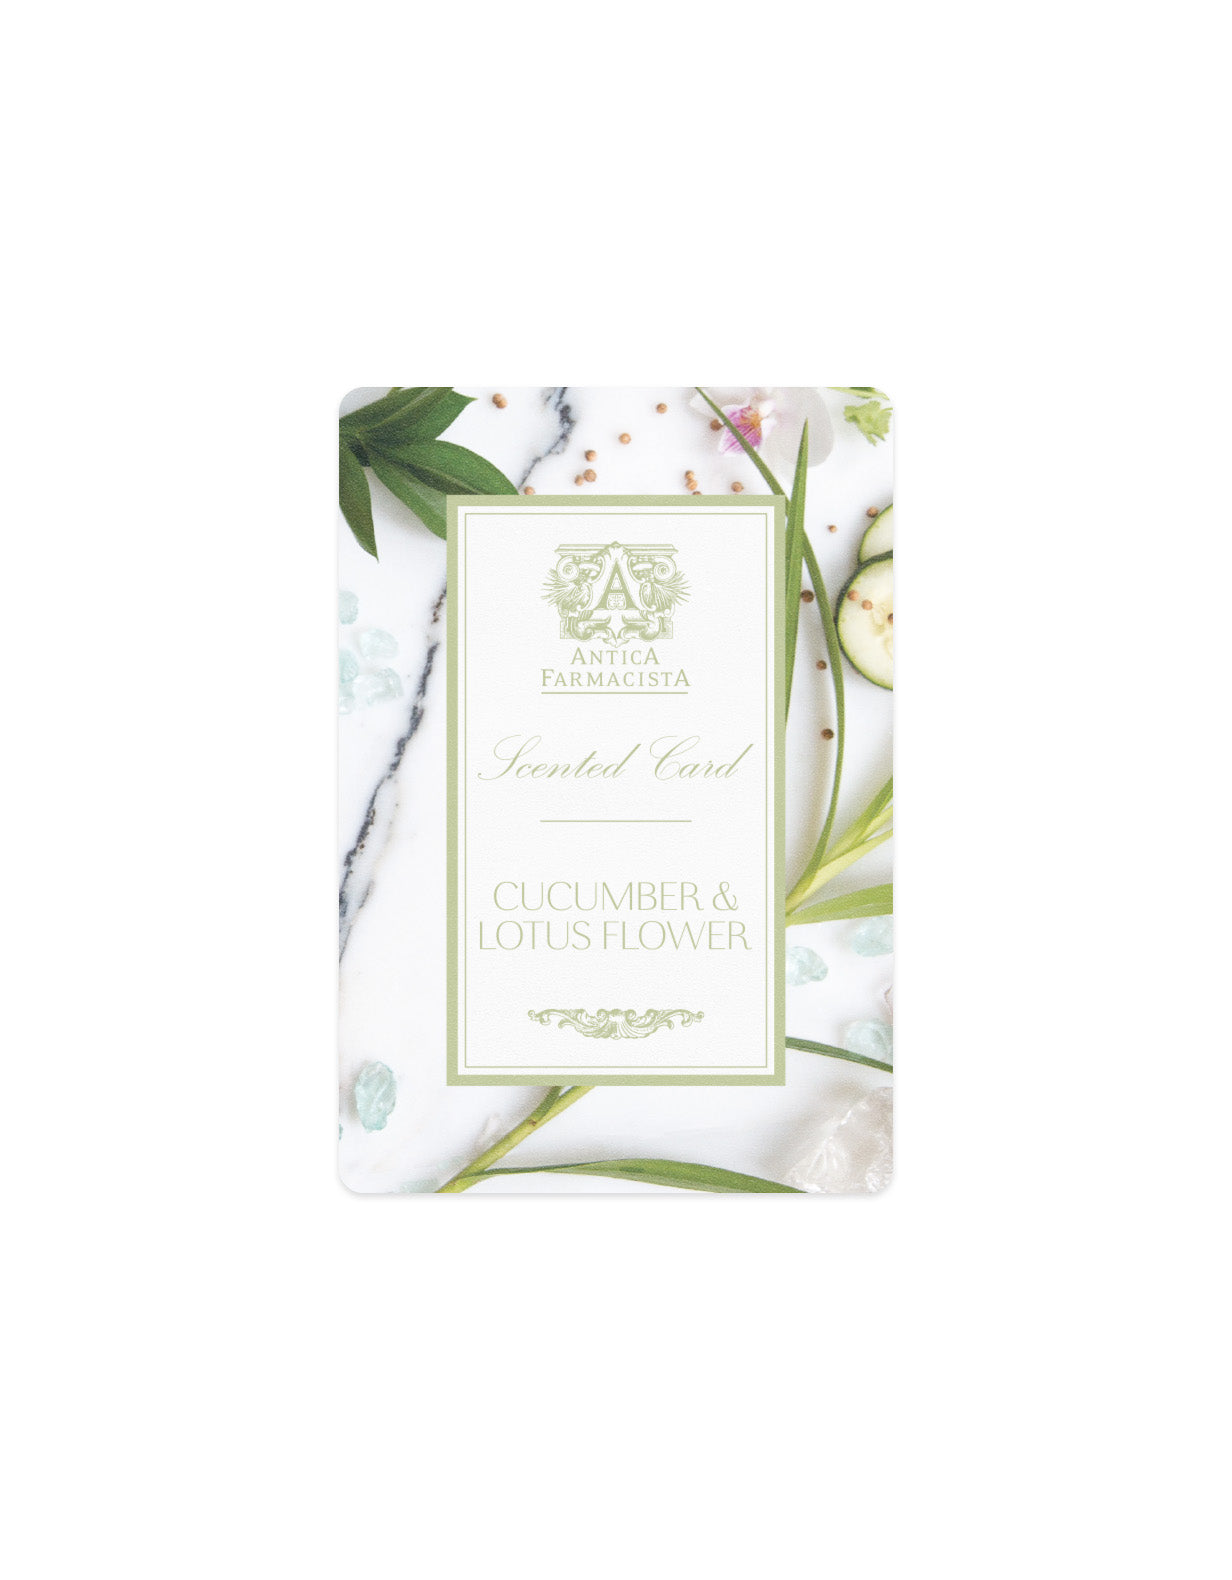 GWP - Scented Card - Cucumber & Lotus Flower